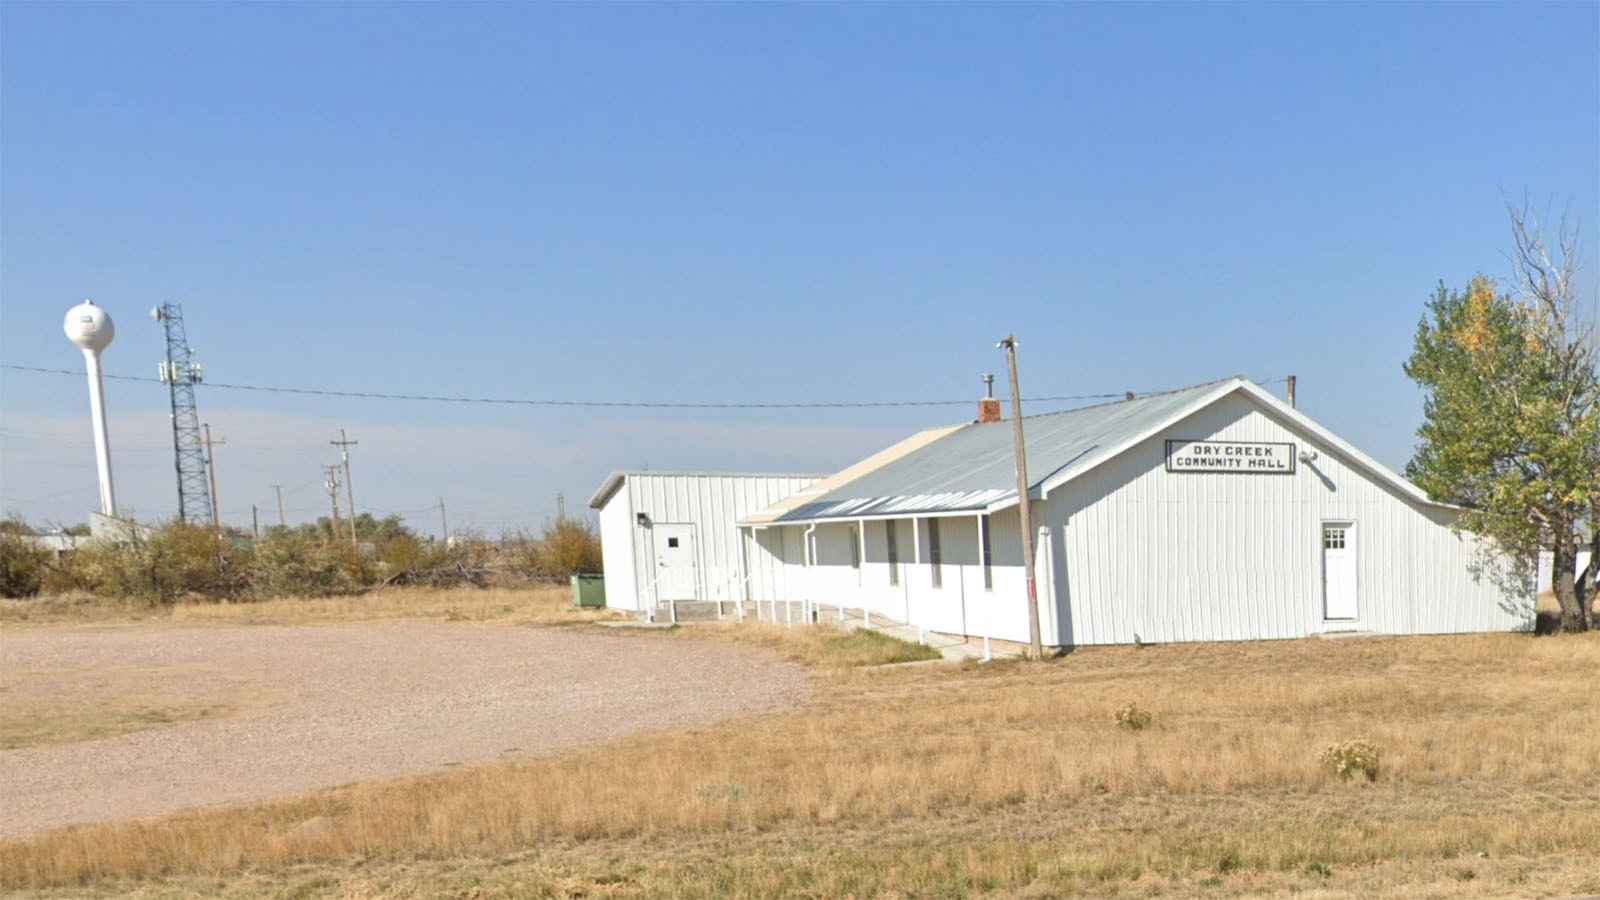 The Dry Creek Community Hall in unincorporated Bill, Wyoming, will be the eventual resting place for Harold Shelden’s Purple Heart.